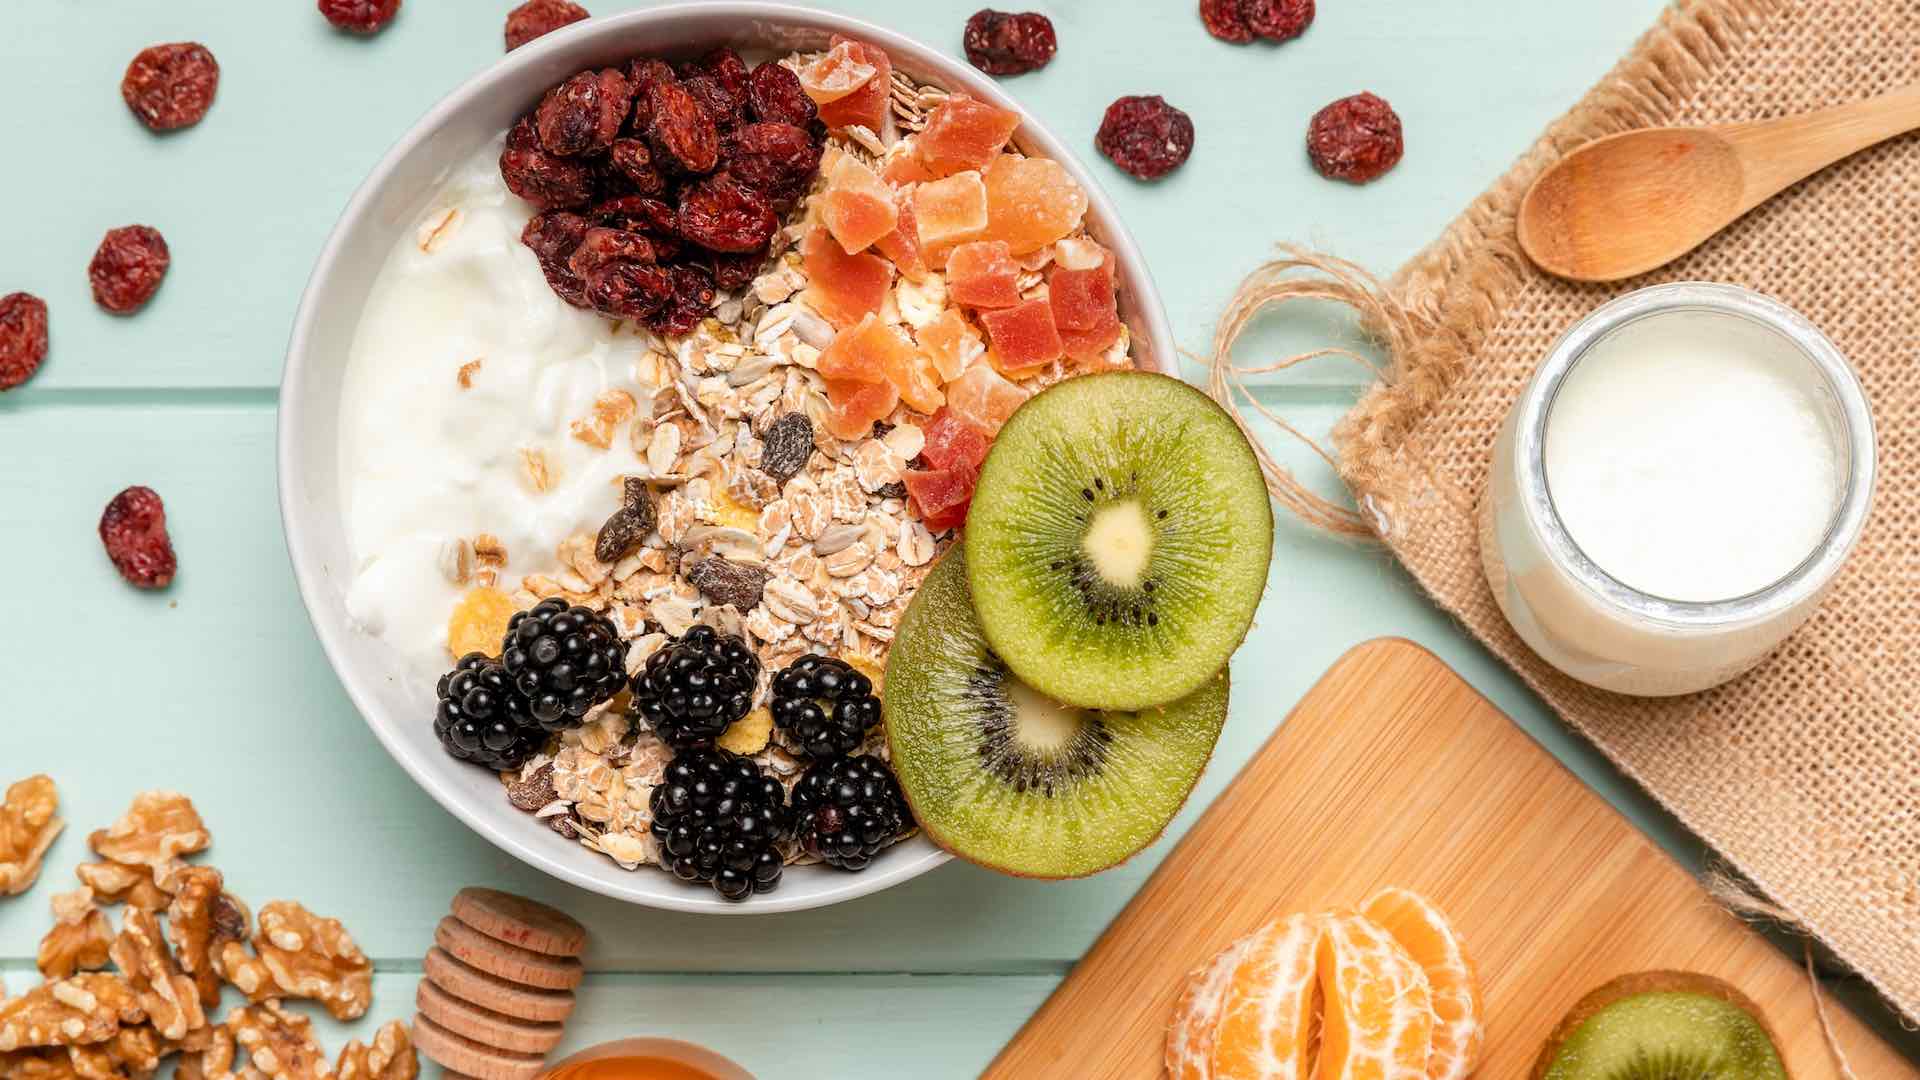 Researchers highlight the extended health perks of insoluble fiber consumption